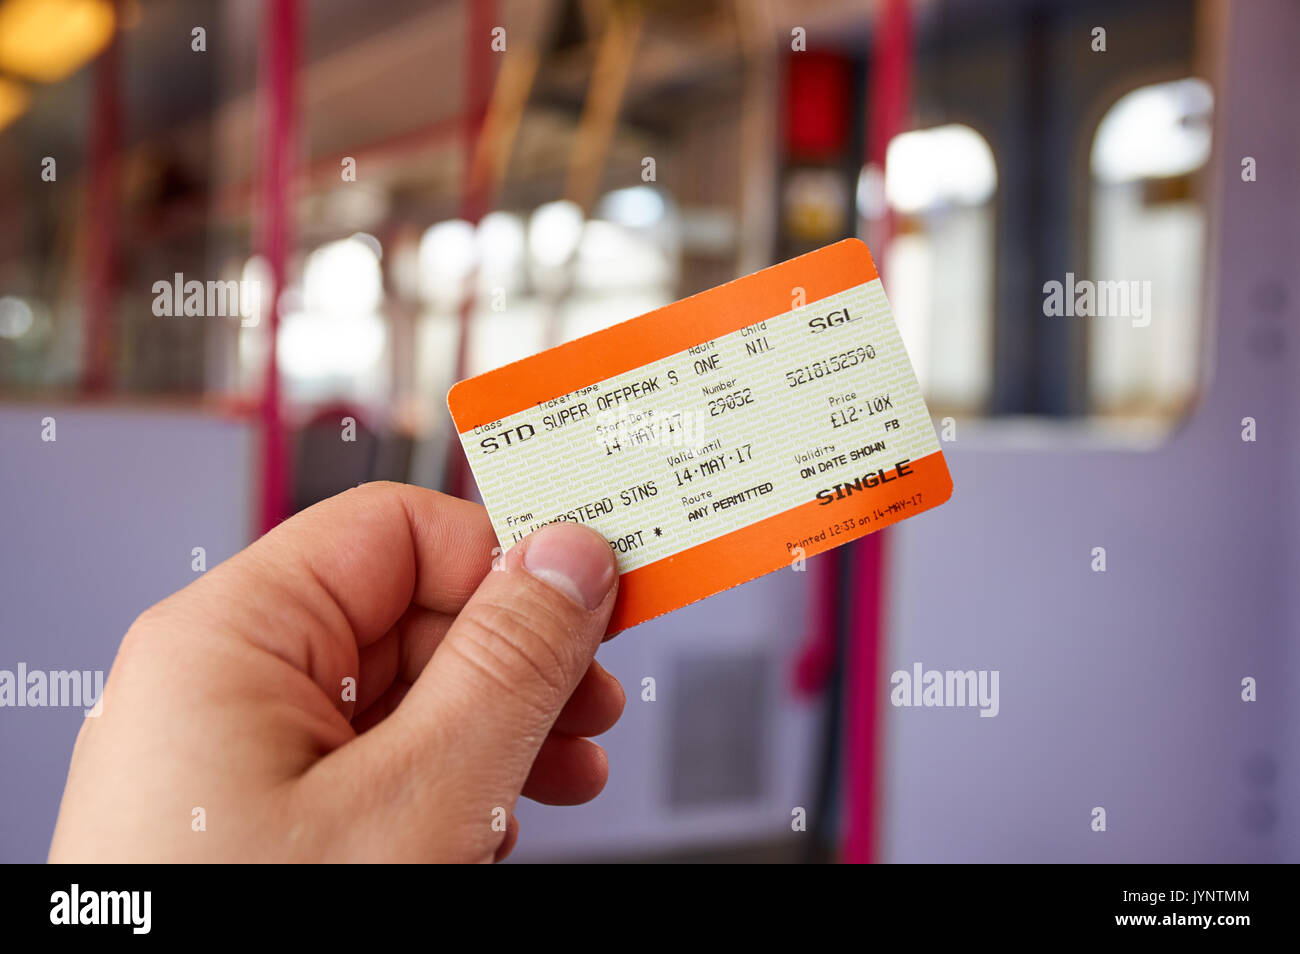 LONDON, ENGLAND - MAY 14, 2017 : UK Rail National single offpeak standard ticket. In the United Kingdom, National Rail is the trading name licensed fo Stock Photo